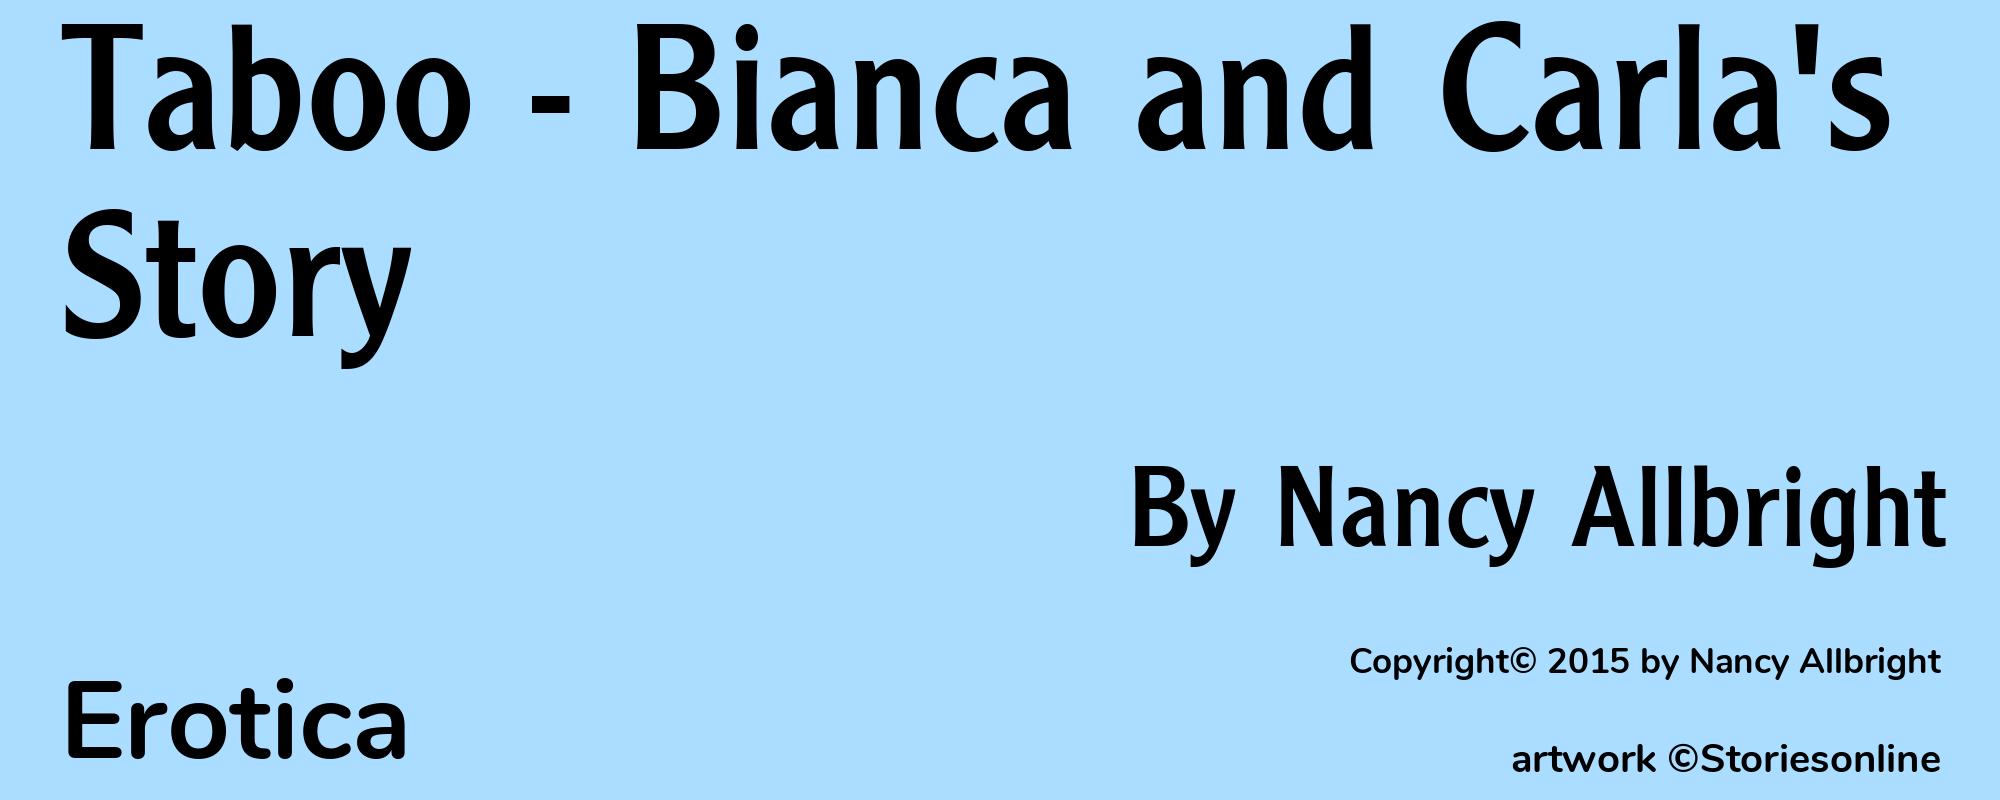 Taboo - Bianca and Carla's Story - Cover